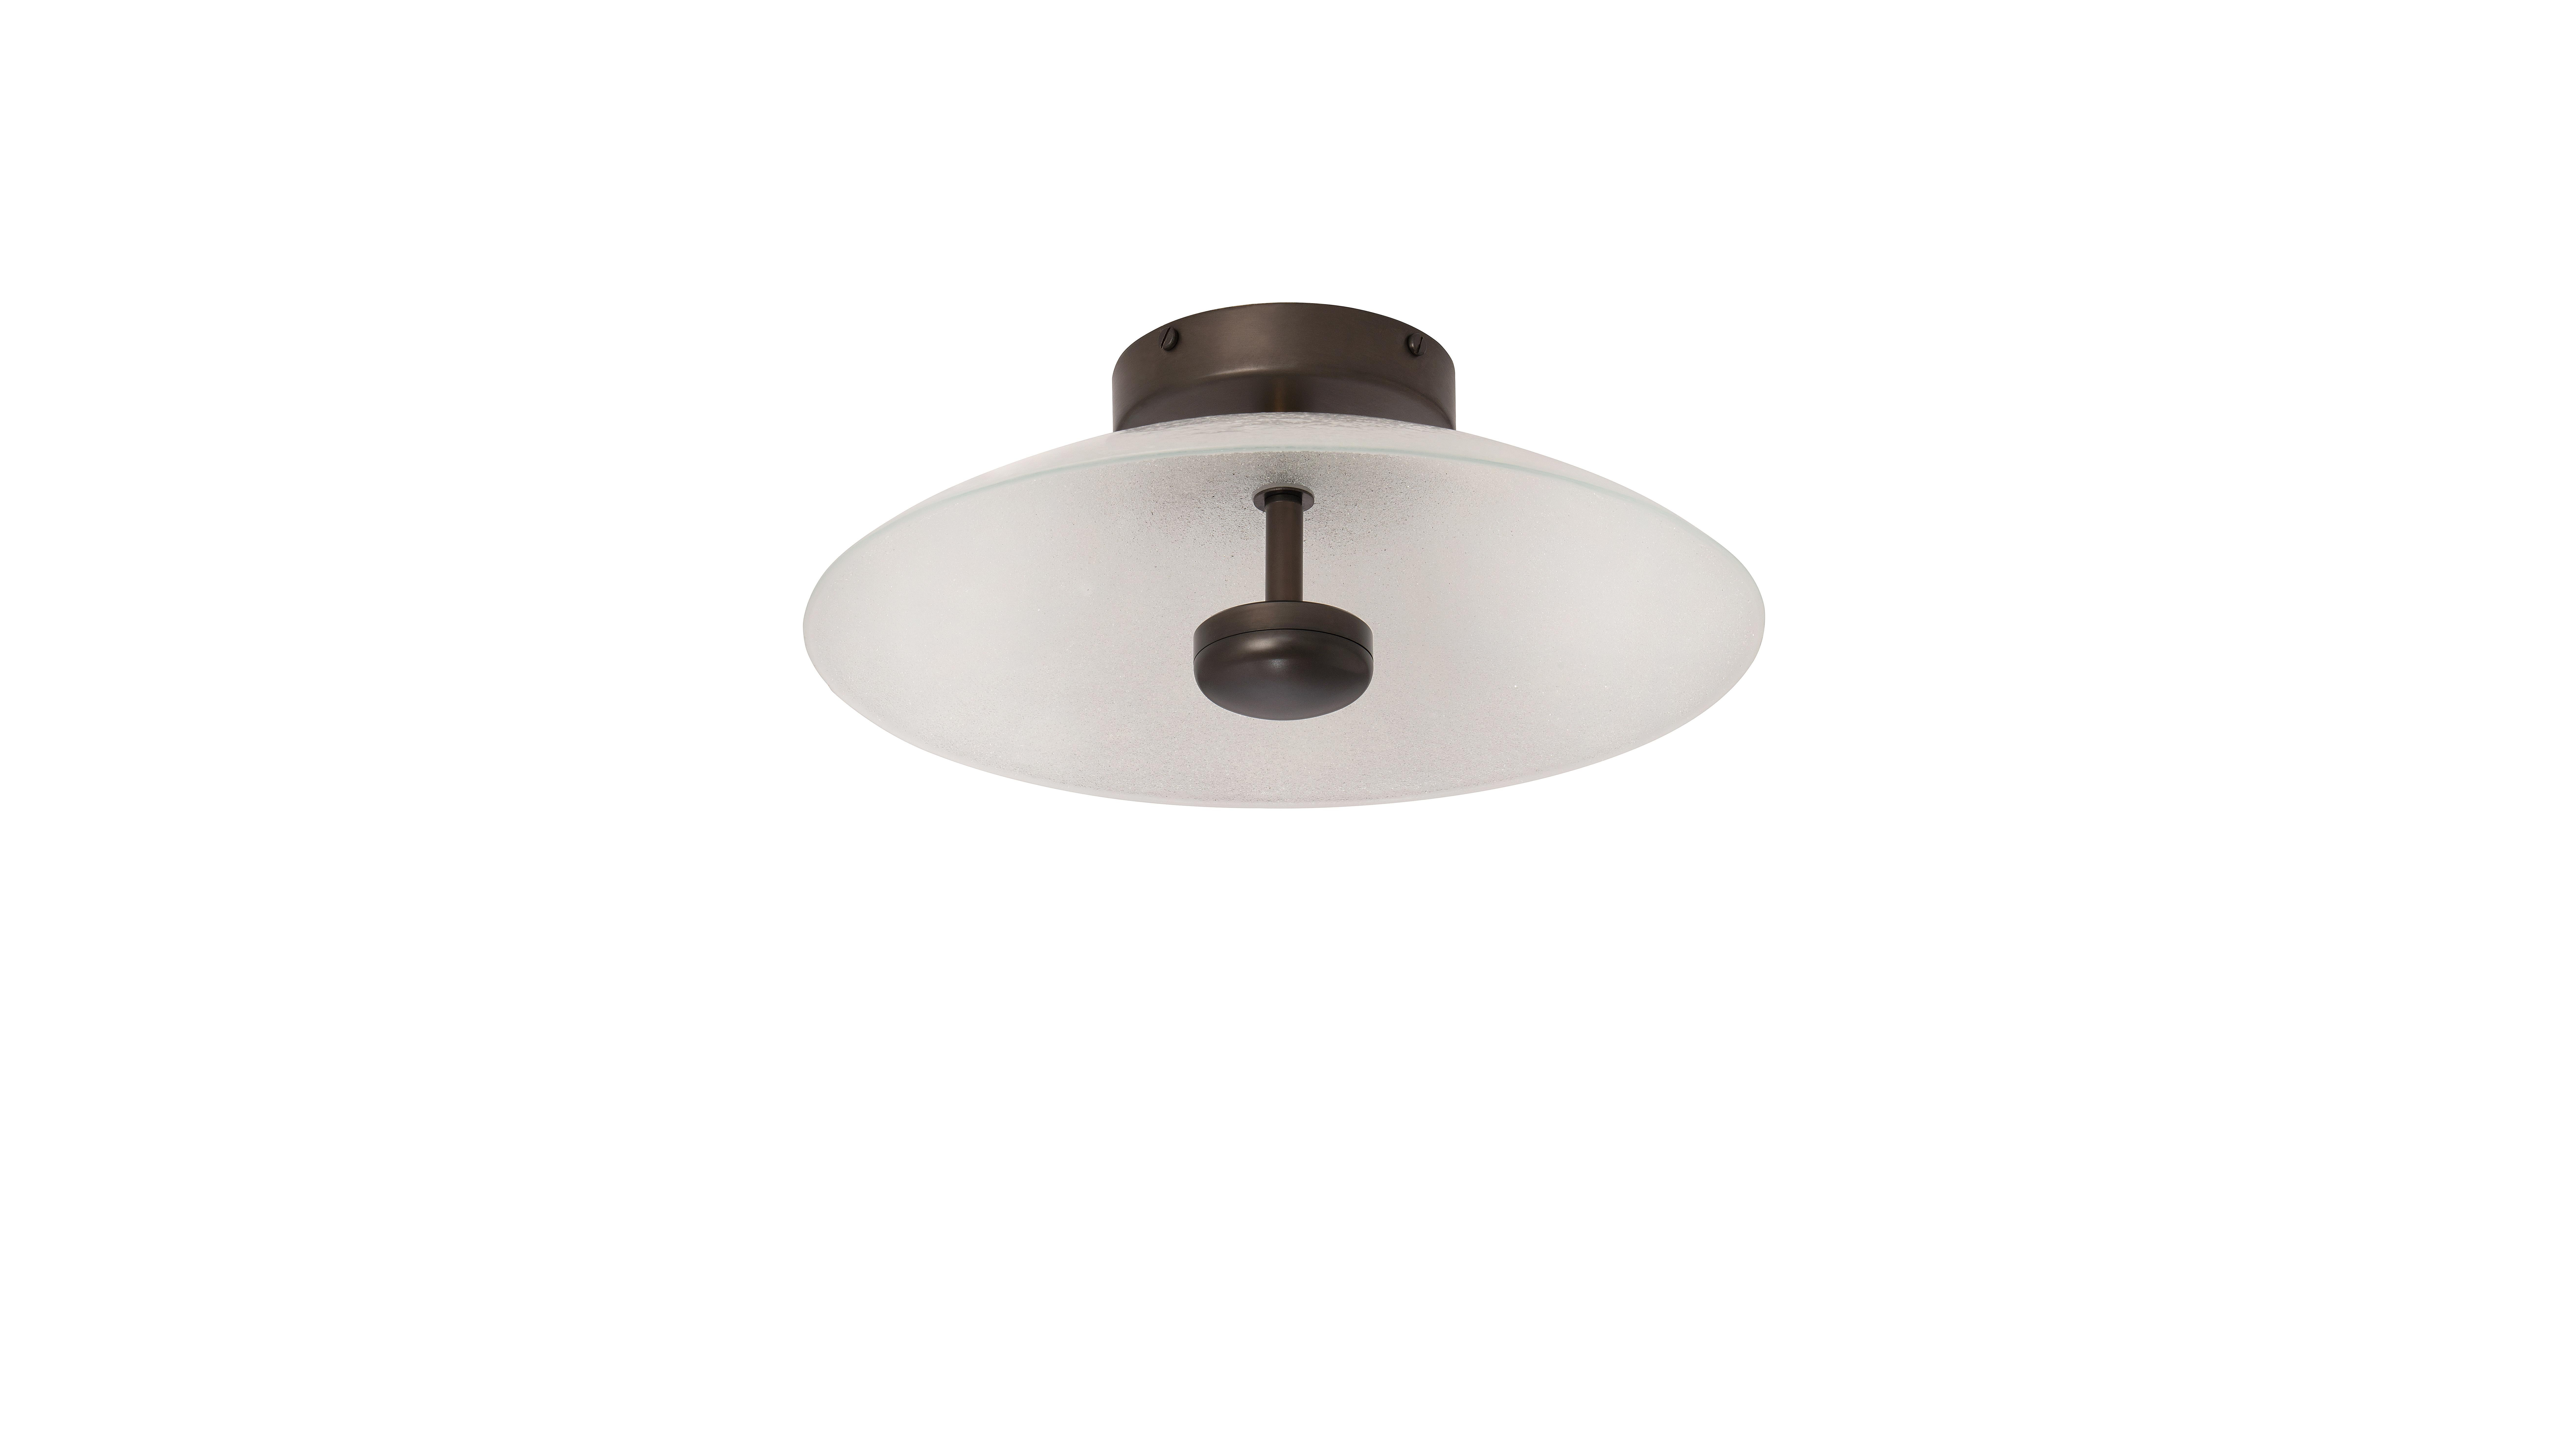 Cielo small ceiling lamp by CTO Lighting
Materials: Satin brass with hand fritted glass
Dimensions: W 31.5 x D 31.5 x H 13 cm

Integrated LED - trailing dimmable - 8w - 2700k 
Weight 3.5kg (7.7lbs)
Mounts onto 4” junction box

All our lamps can be